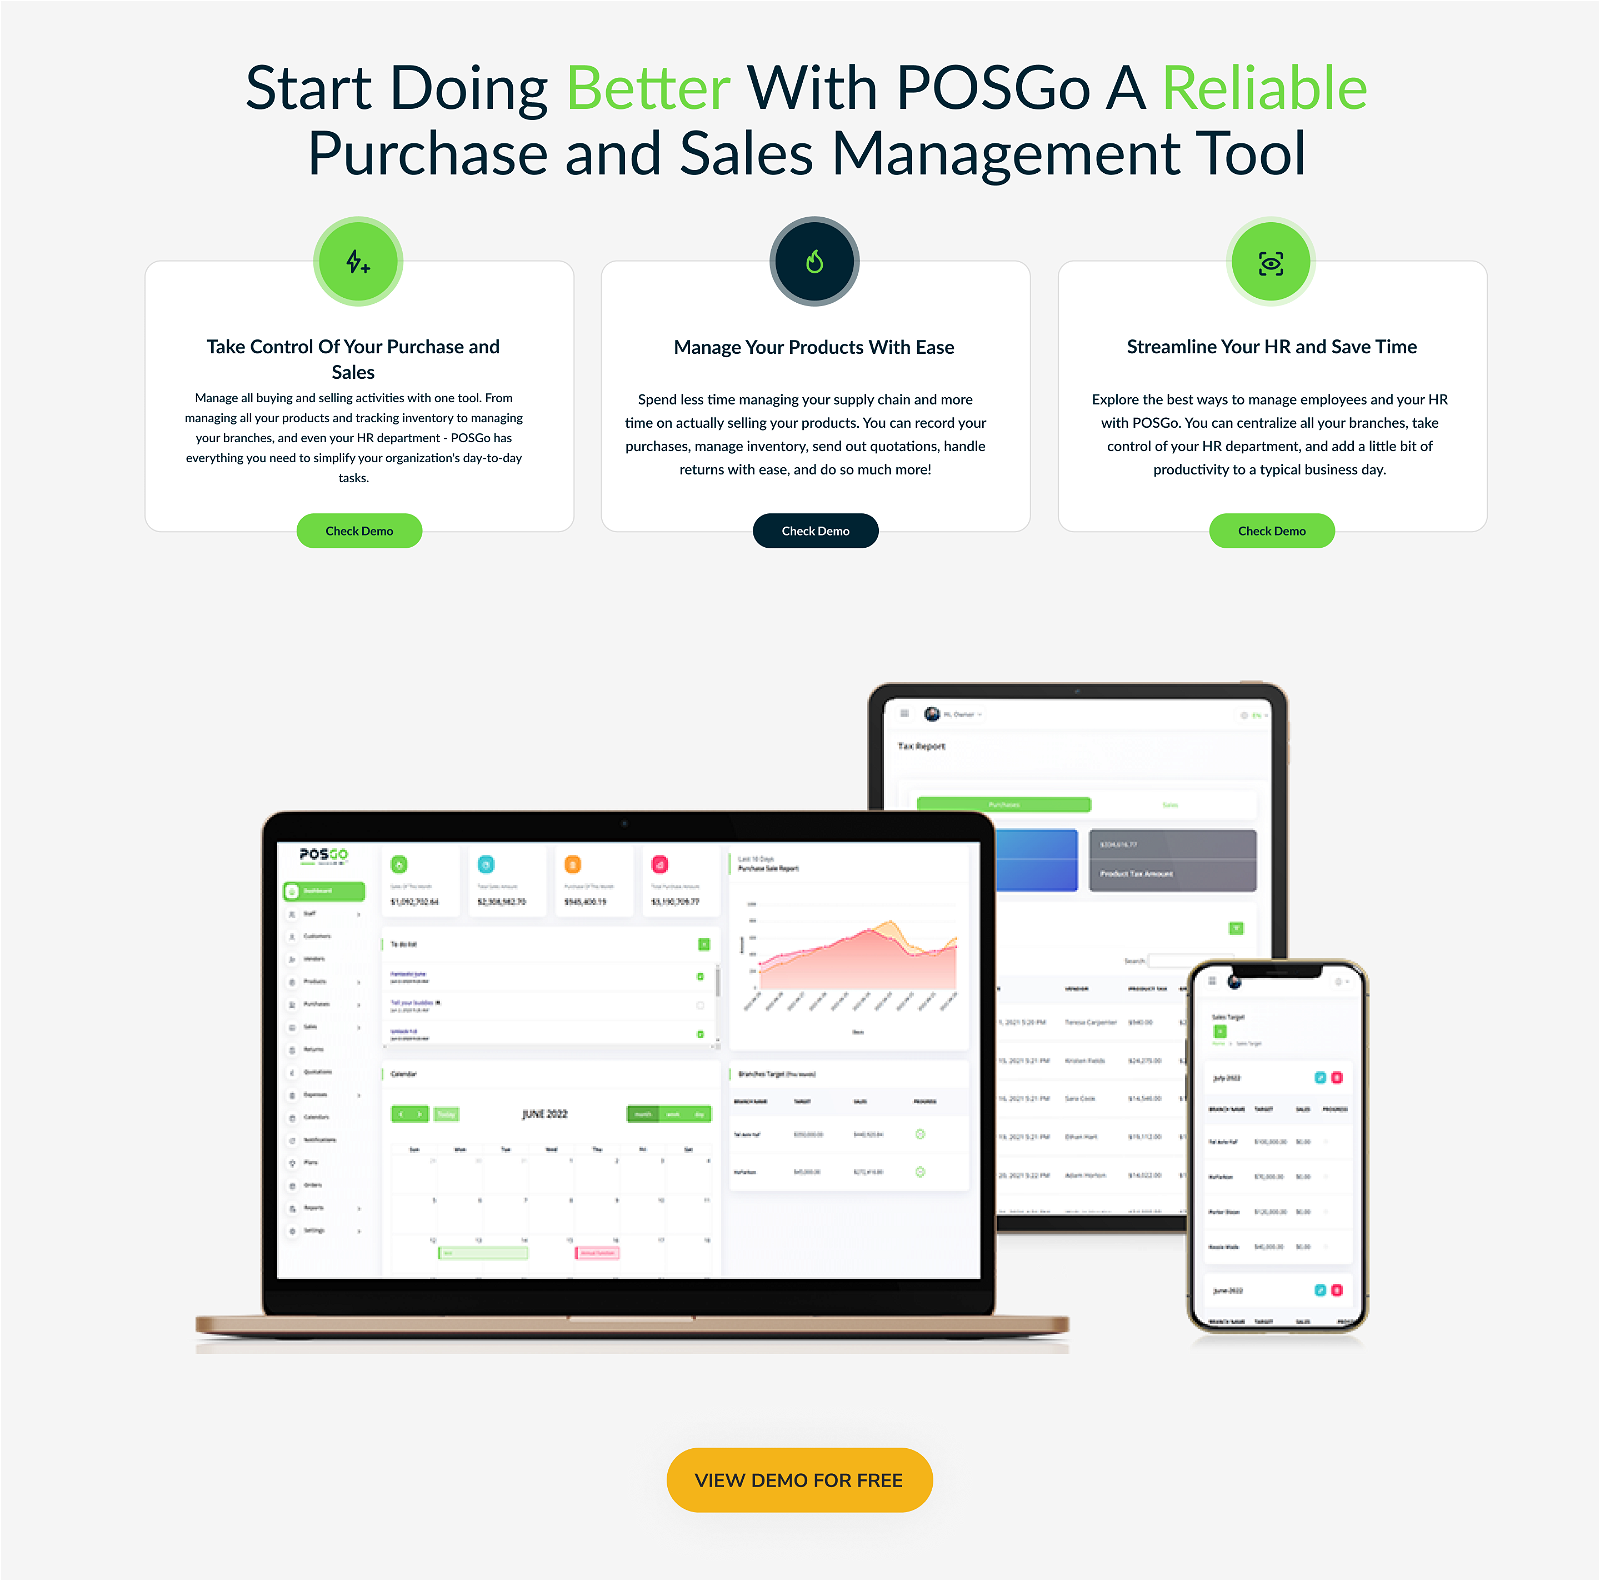 POSGo SaaS - Purchase and Sales Management Tool - 7